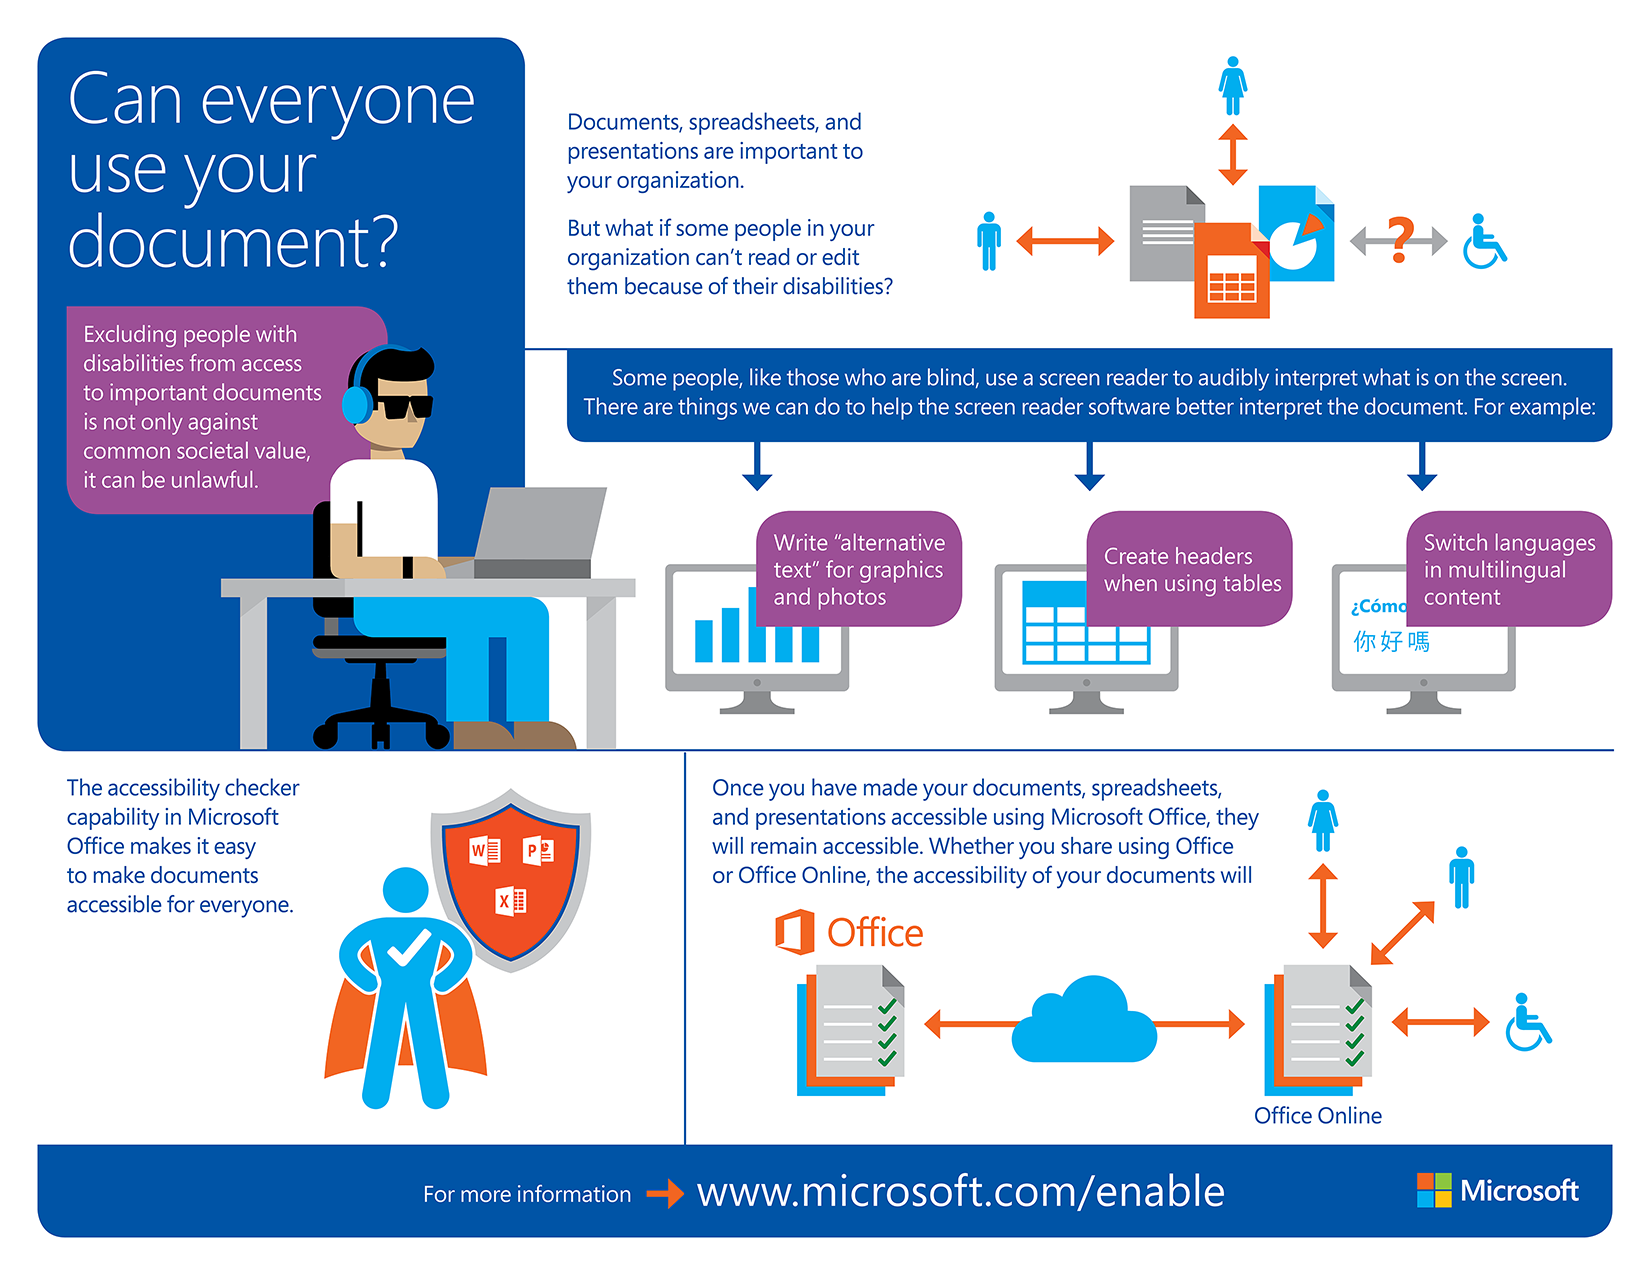 Microsoft Office Online Sees Increased Accessibility